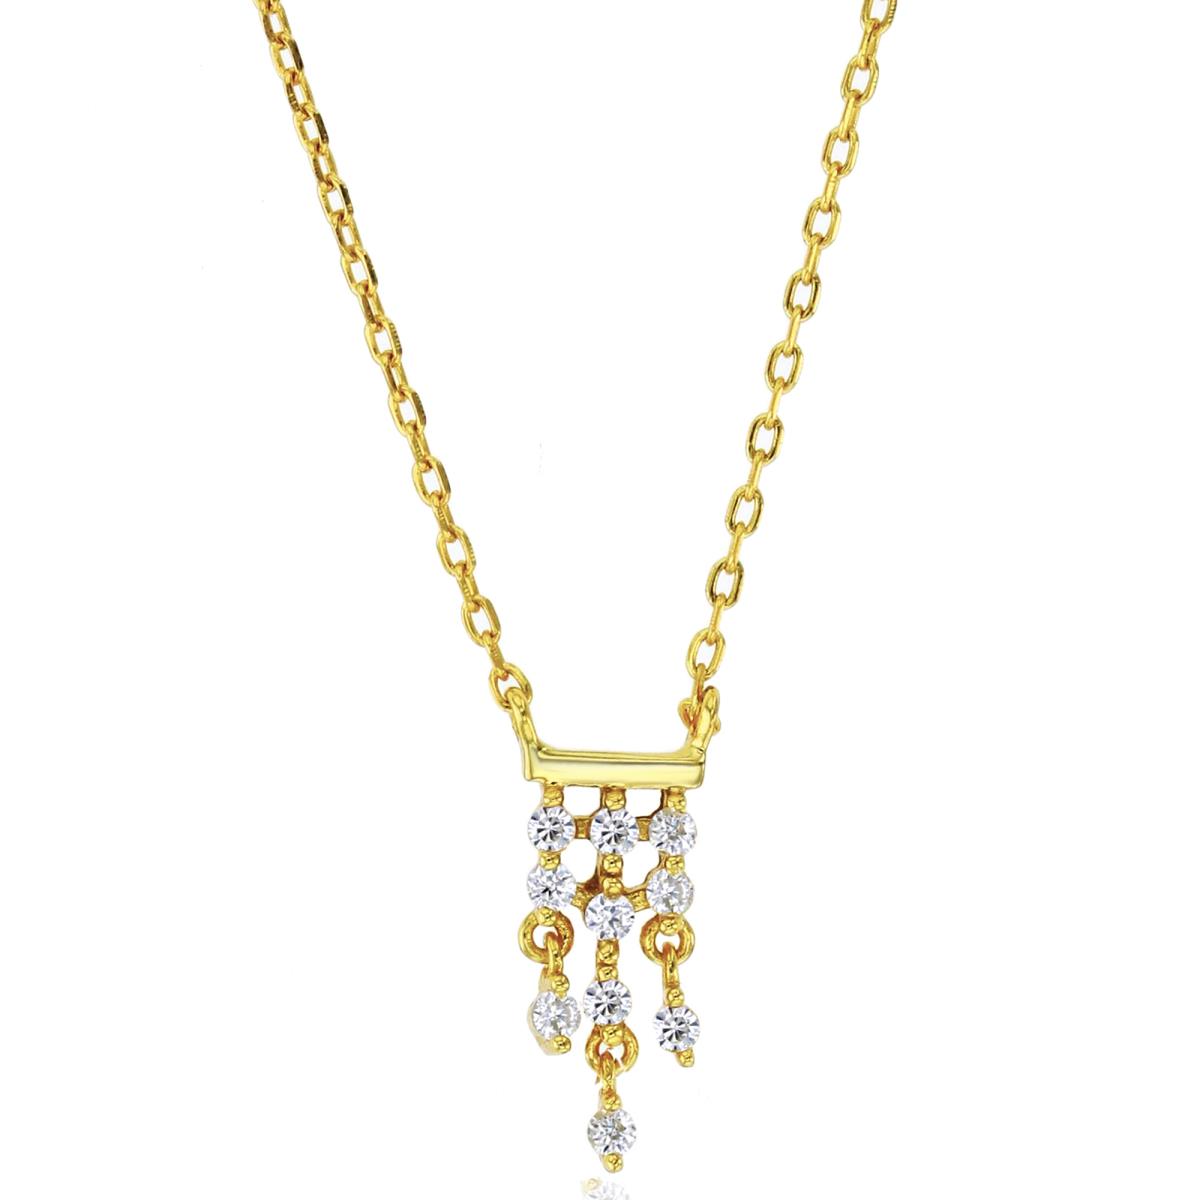 Sterling Silver Yellow Rnd CZ Chandelier 16"+2"Necklace